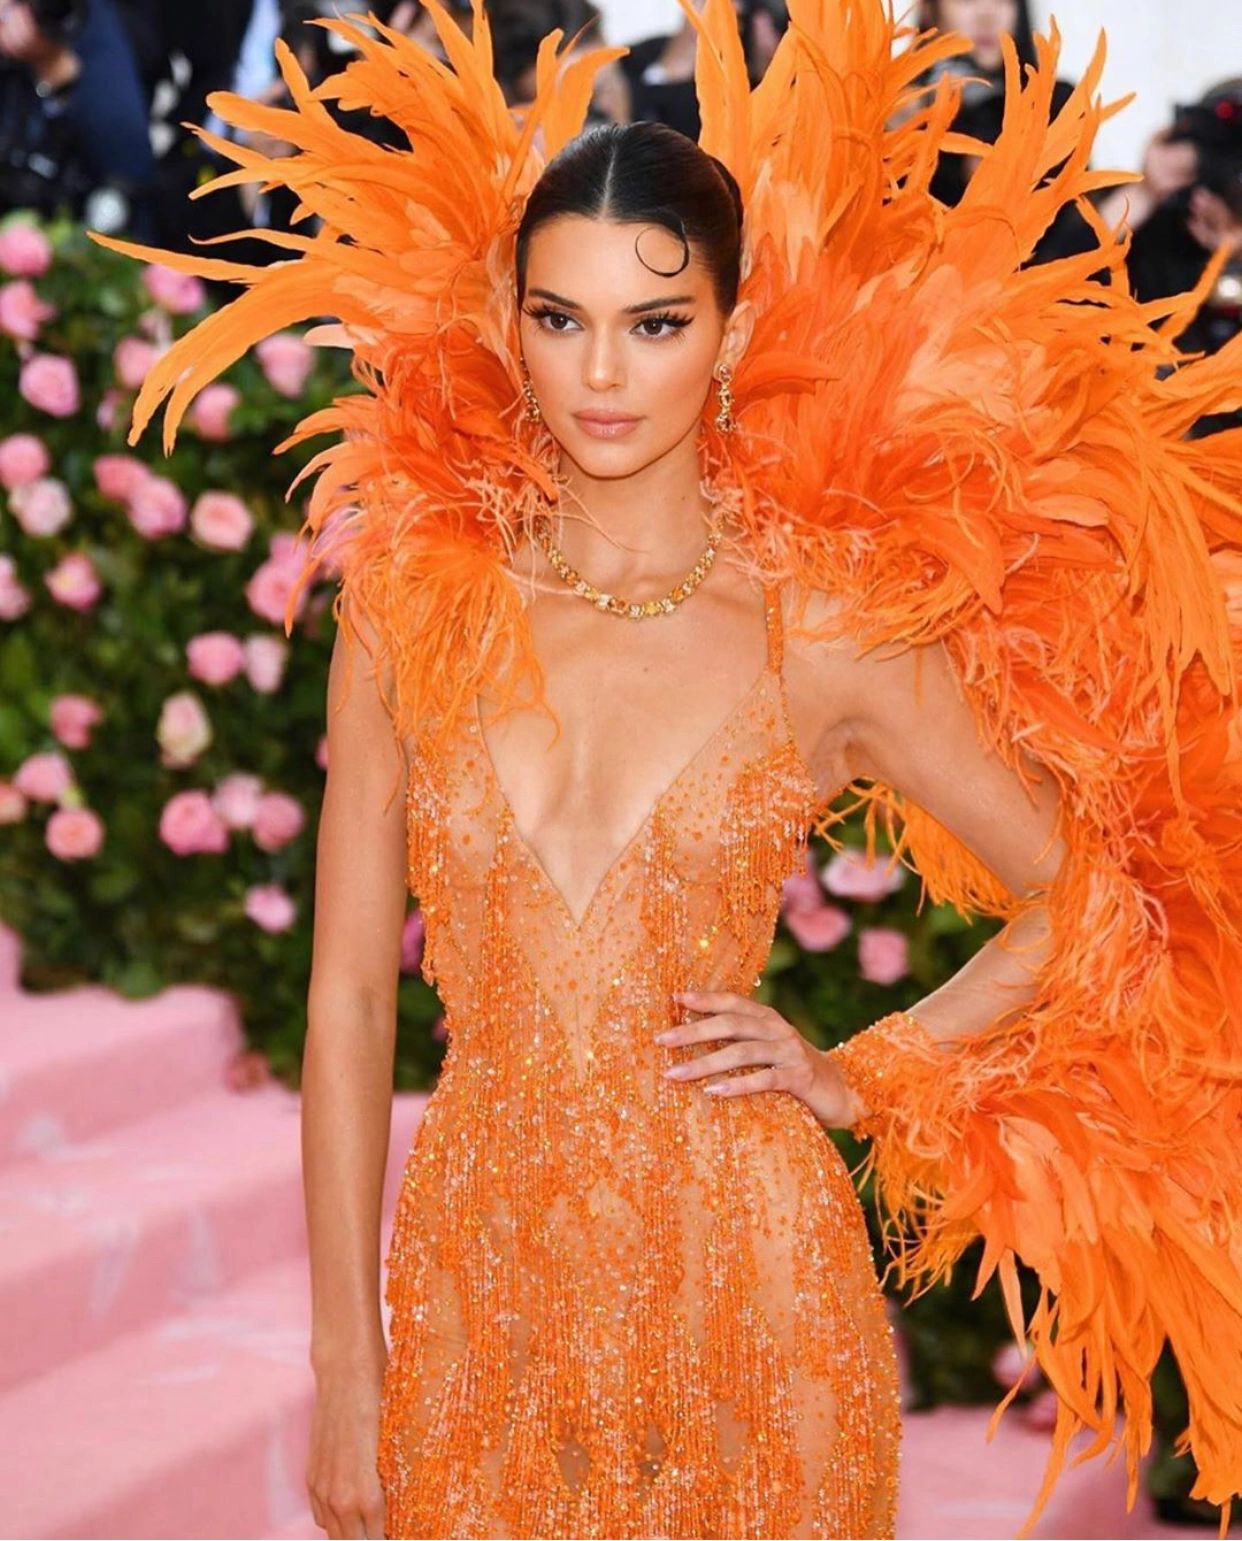 Met Gala, 2019: Kendall Jenner. (Getty Images)